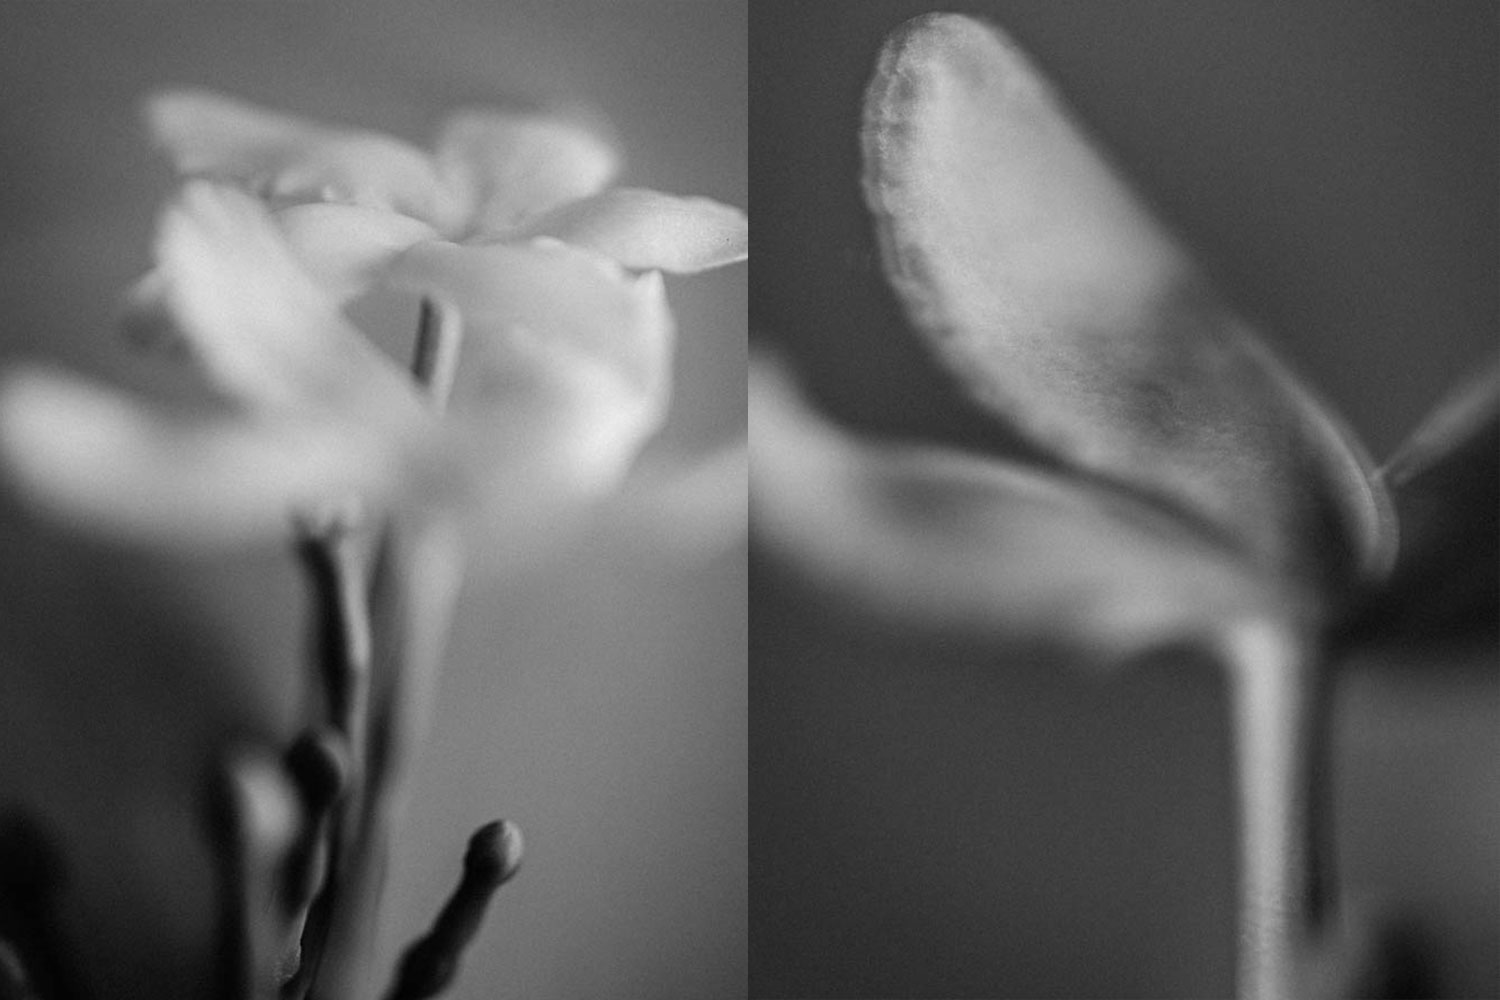 Monochrome images of flowers taken using a macro lens